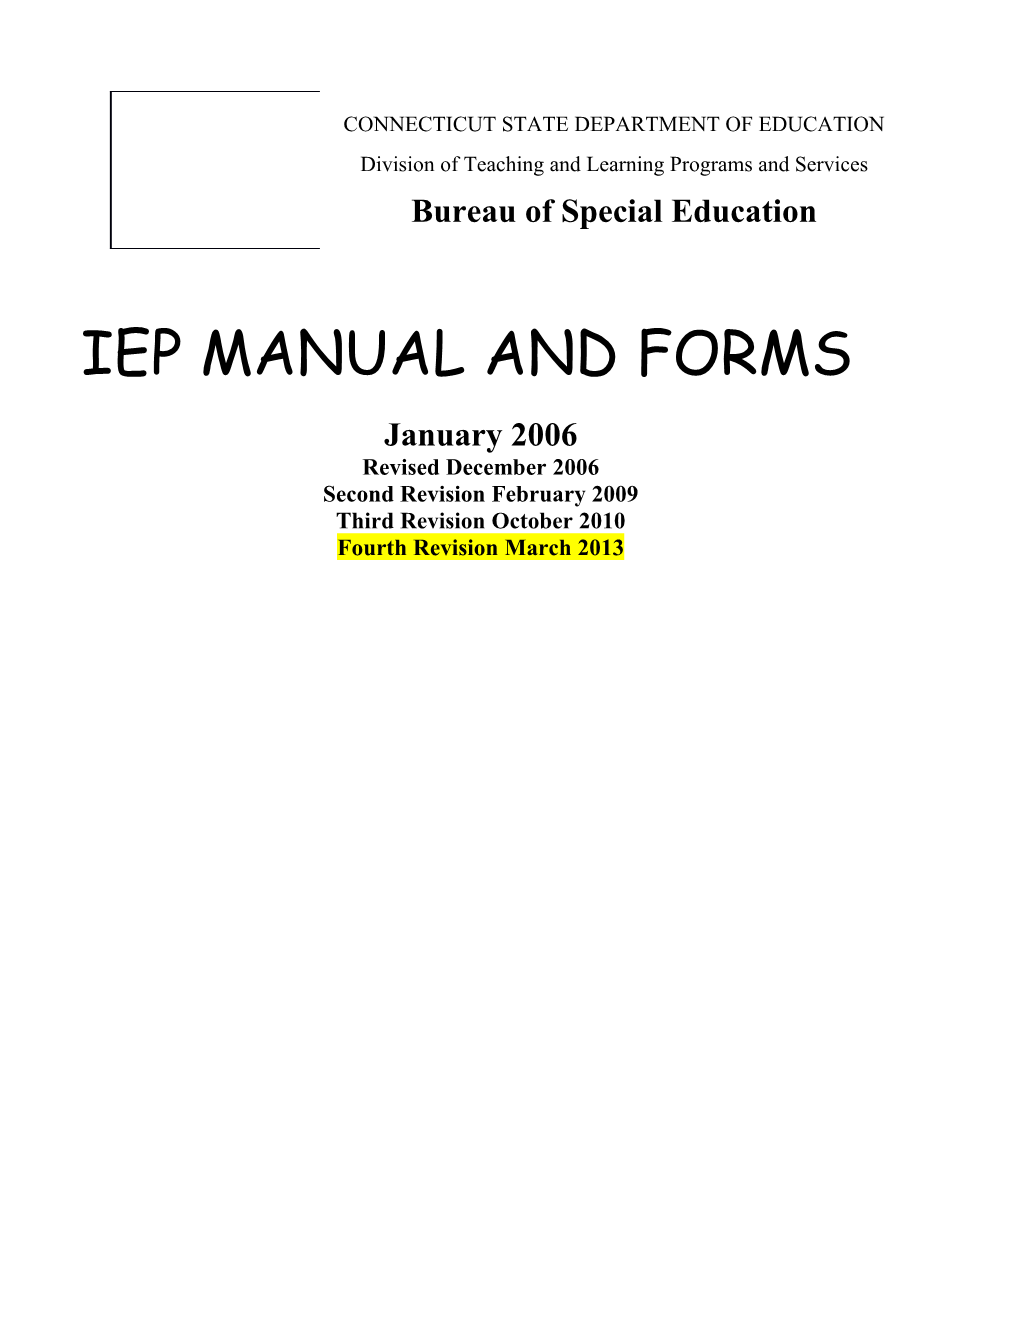 Iep Manual and Forms